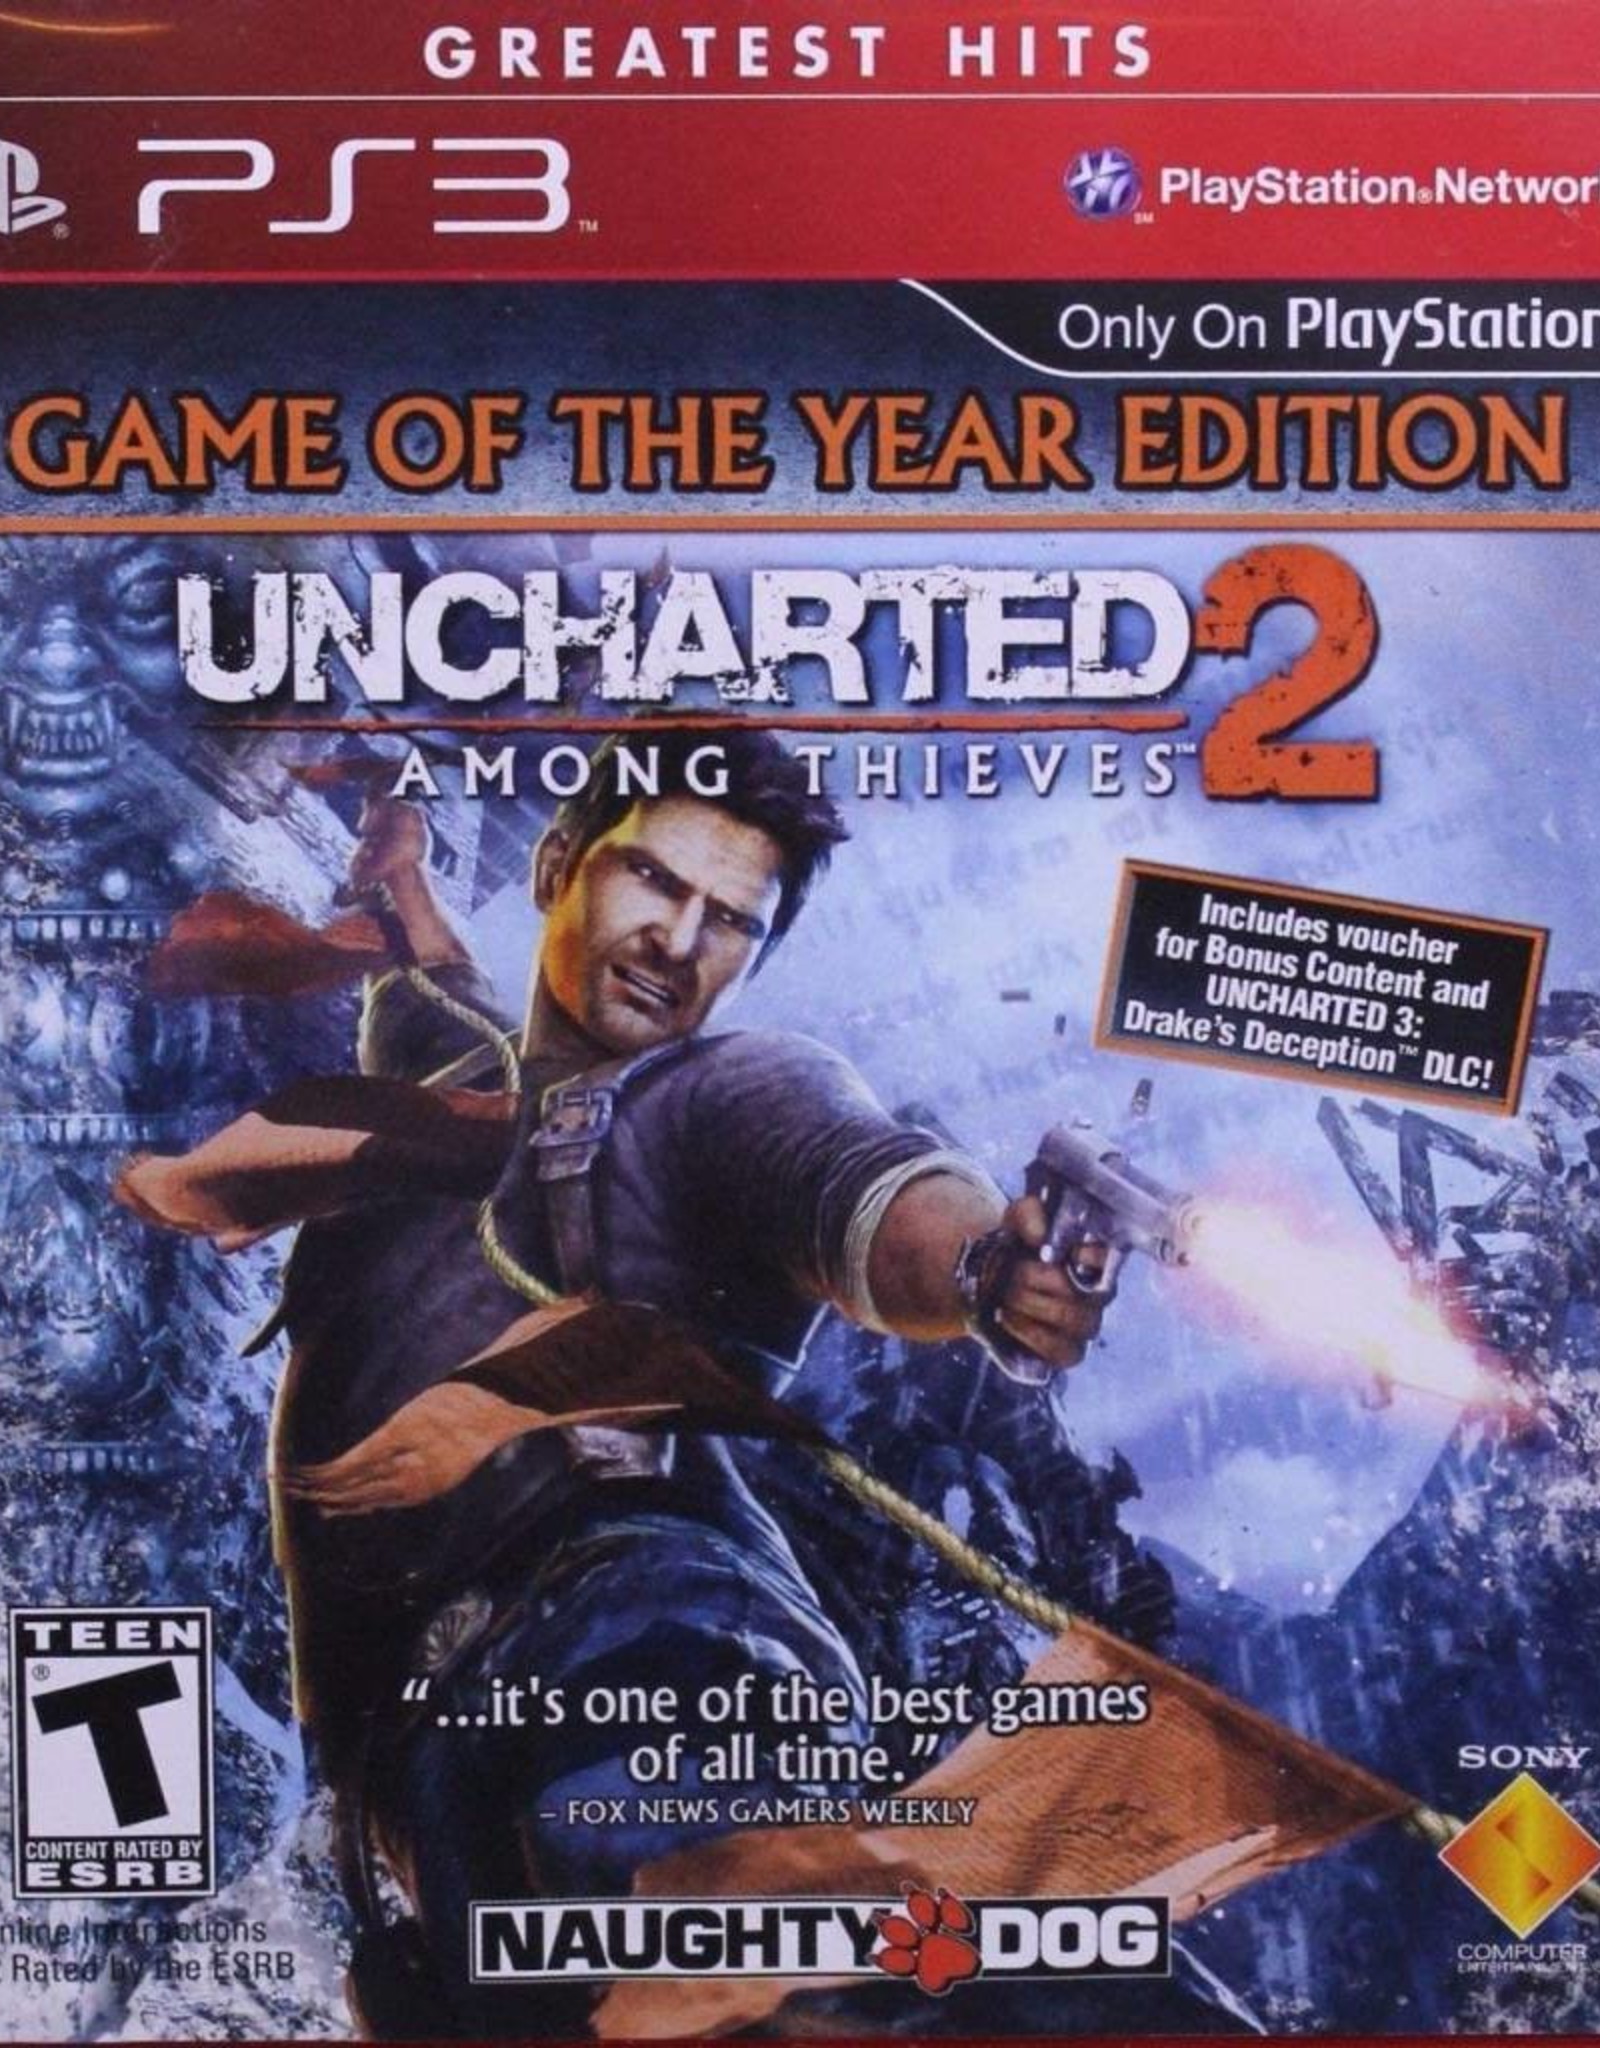 uncharted 2 ps3